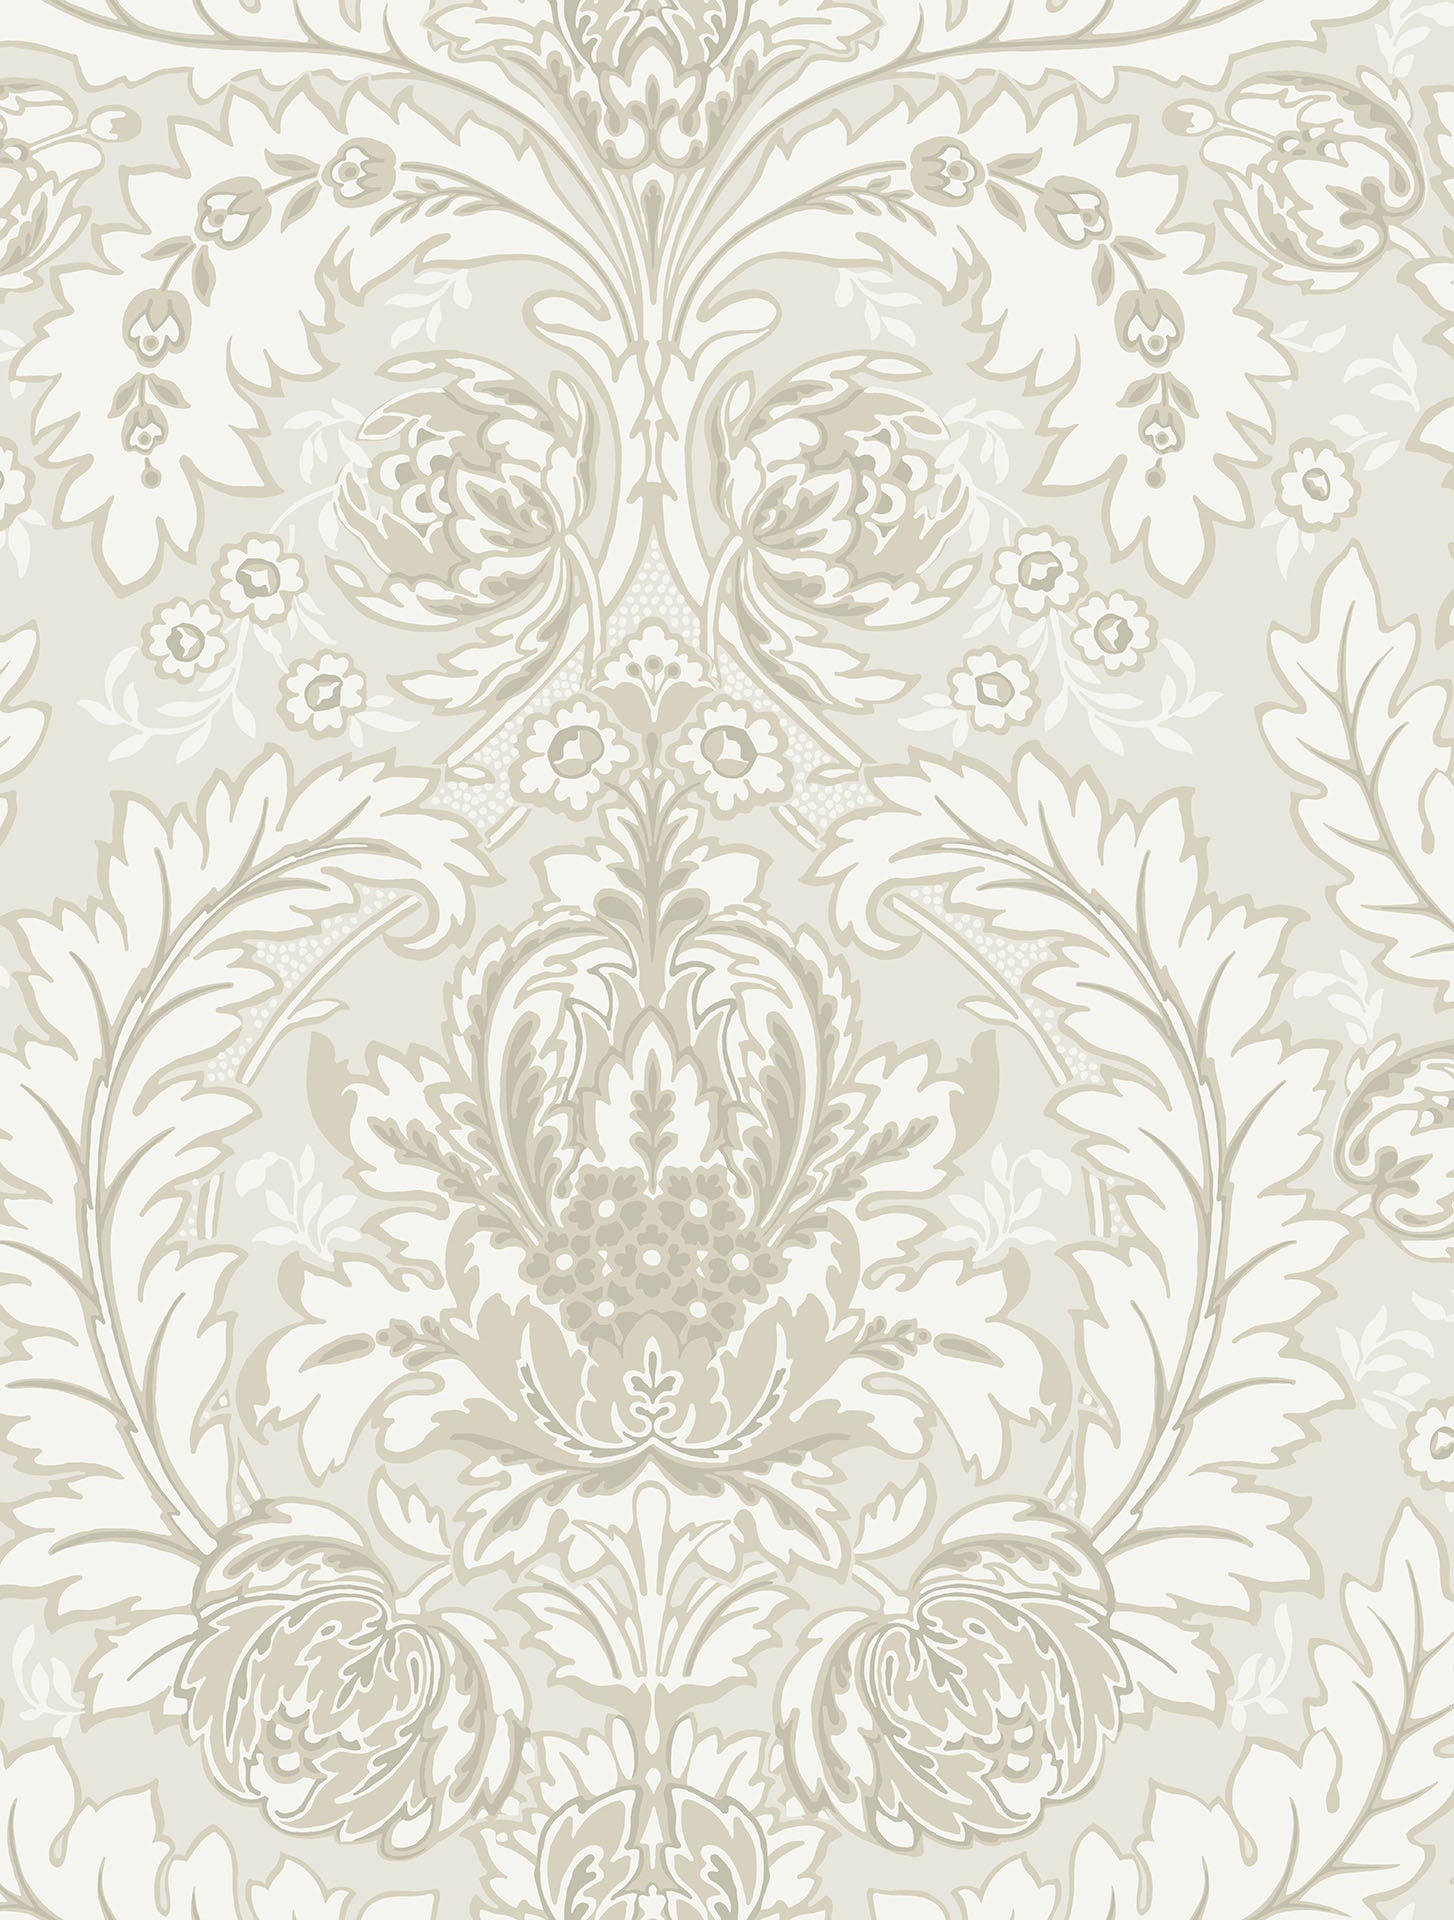 TX34844 - Silver Leaf Damask Wallpaper - Discount Wallcovering